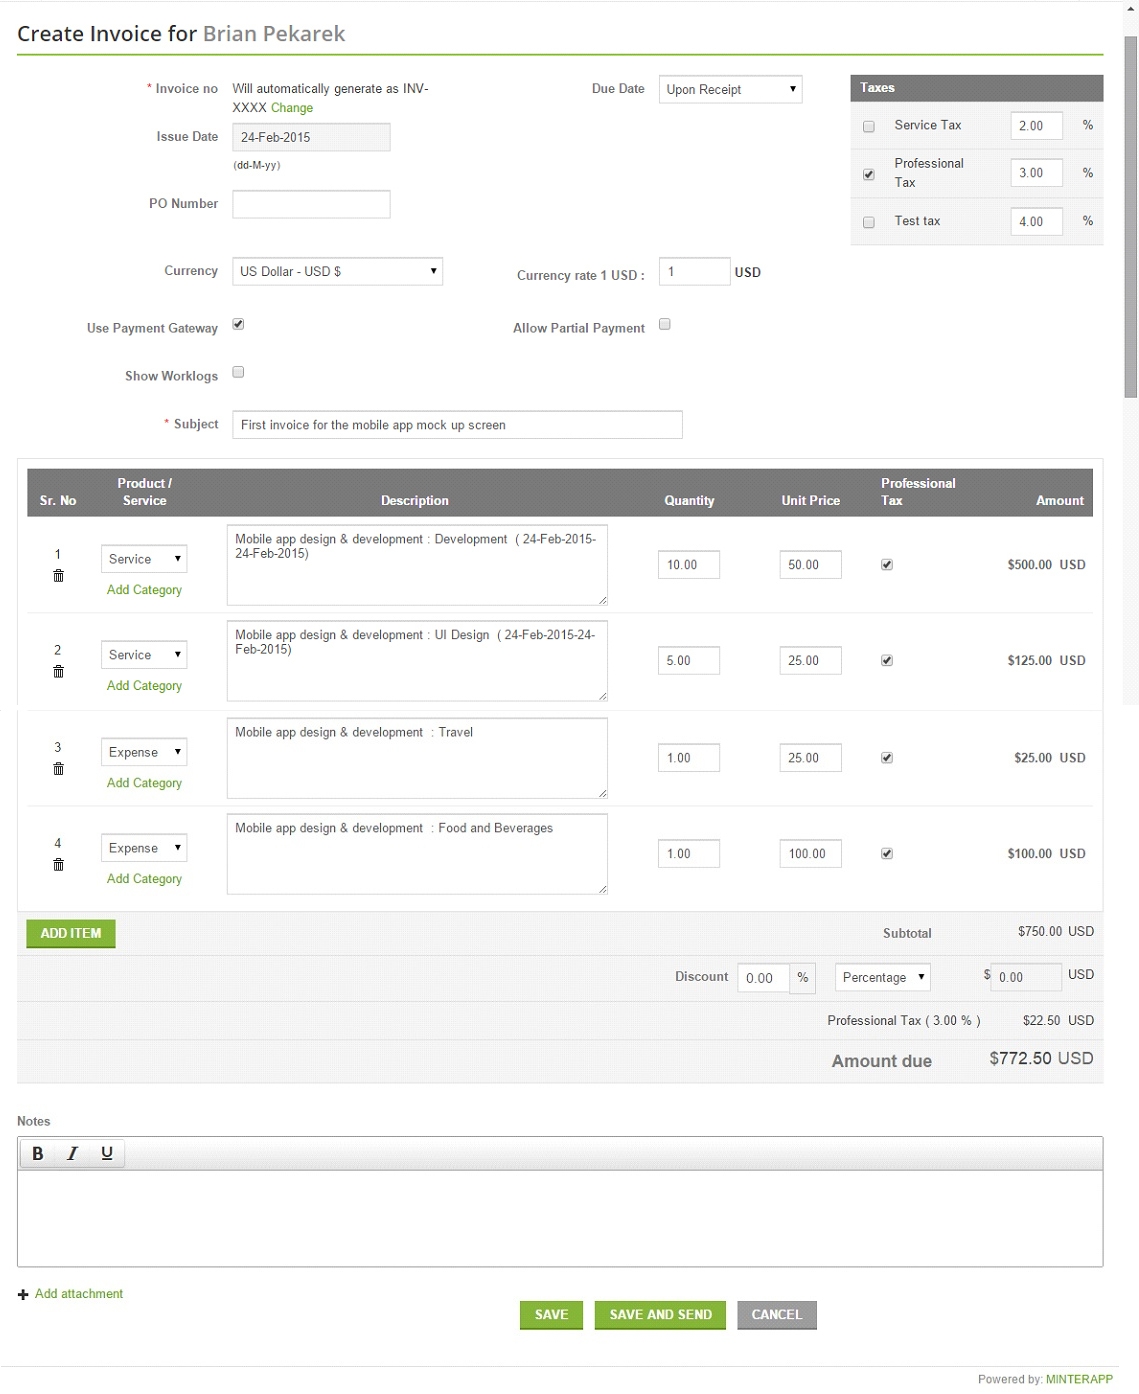 staples invoicing system